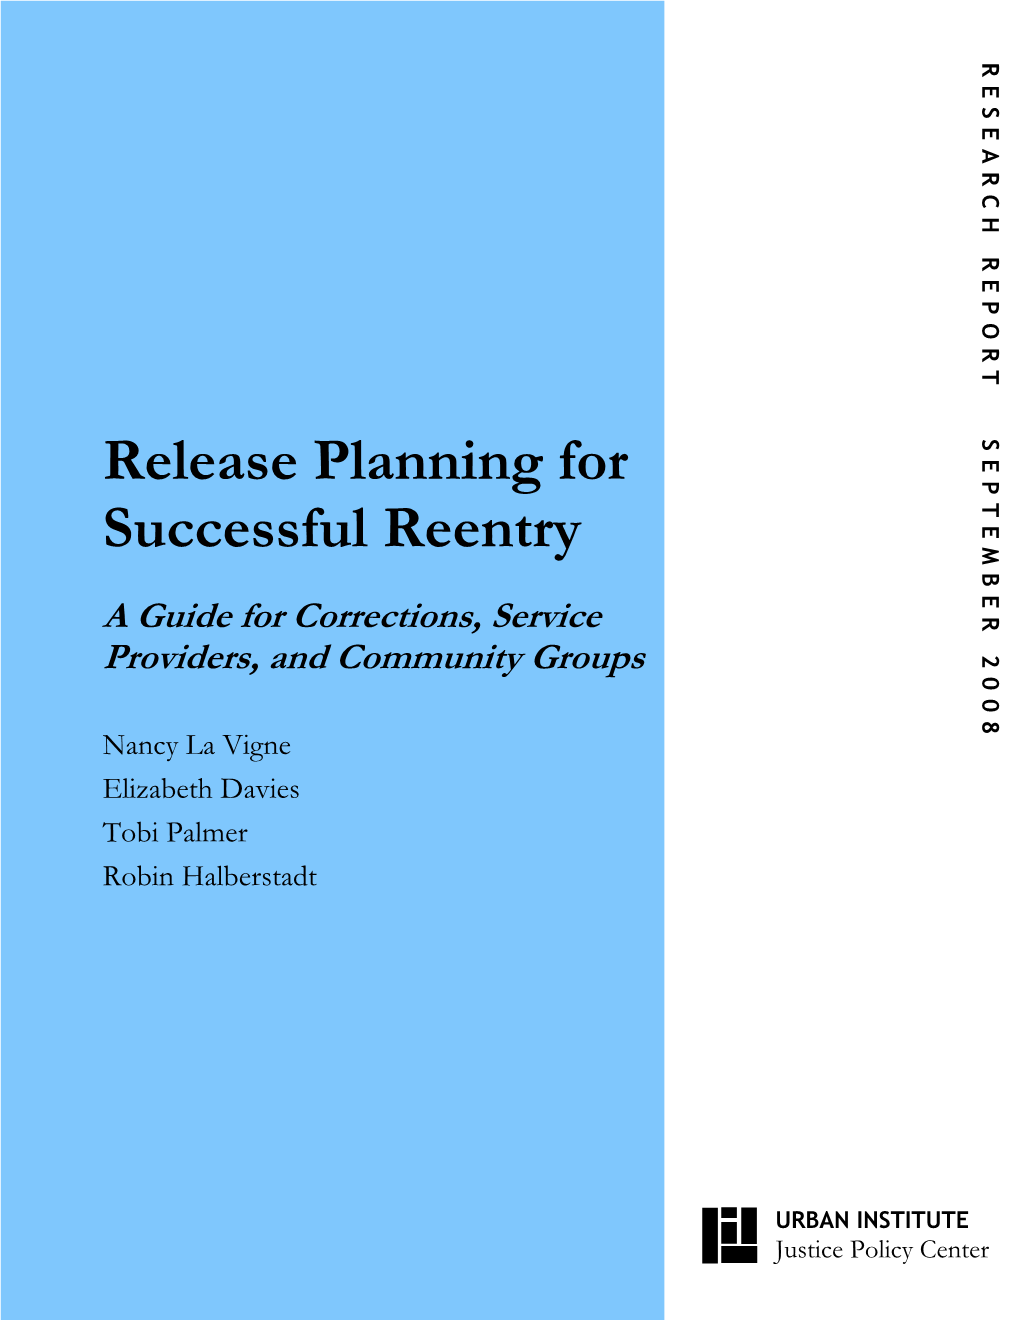 Release Planning for Successful Reentry